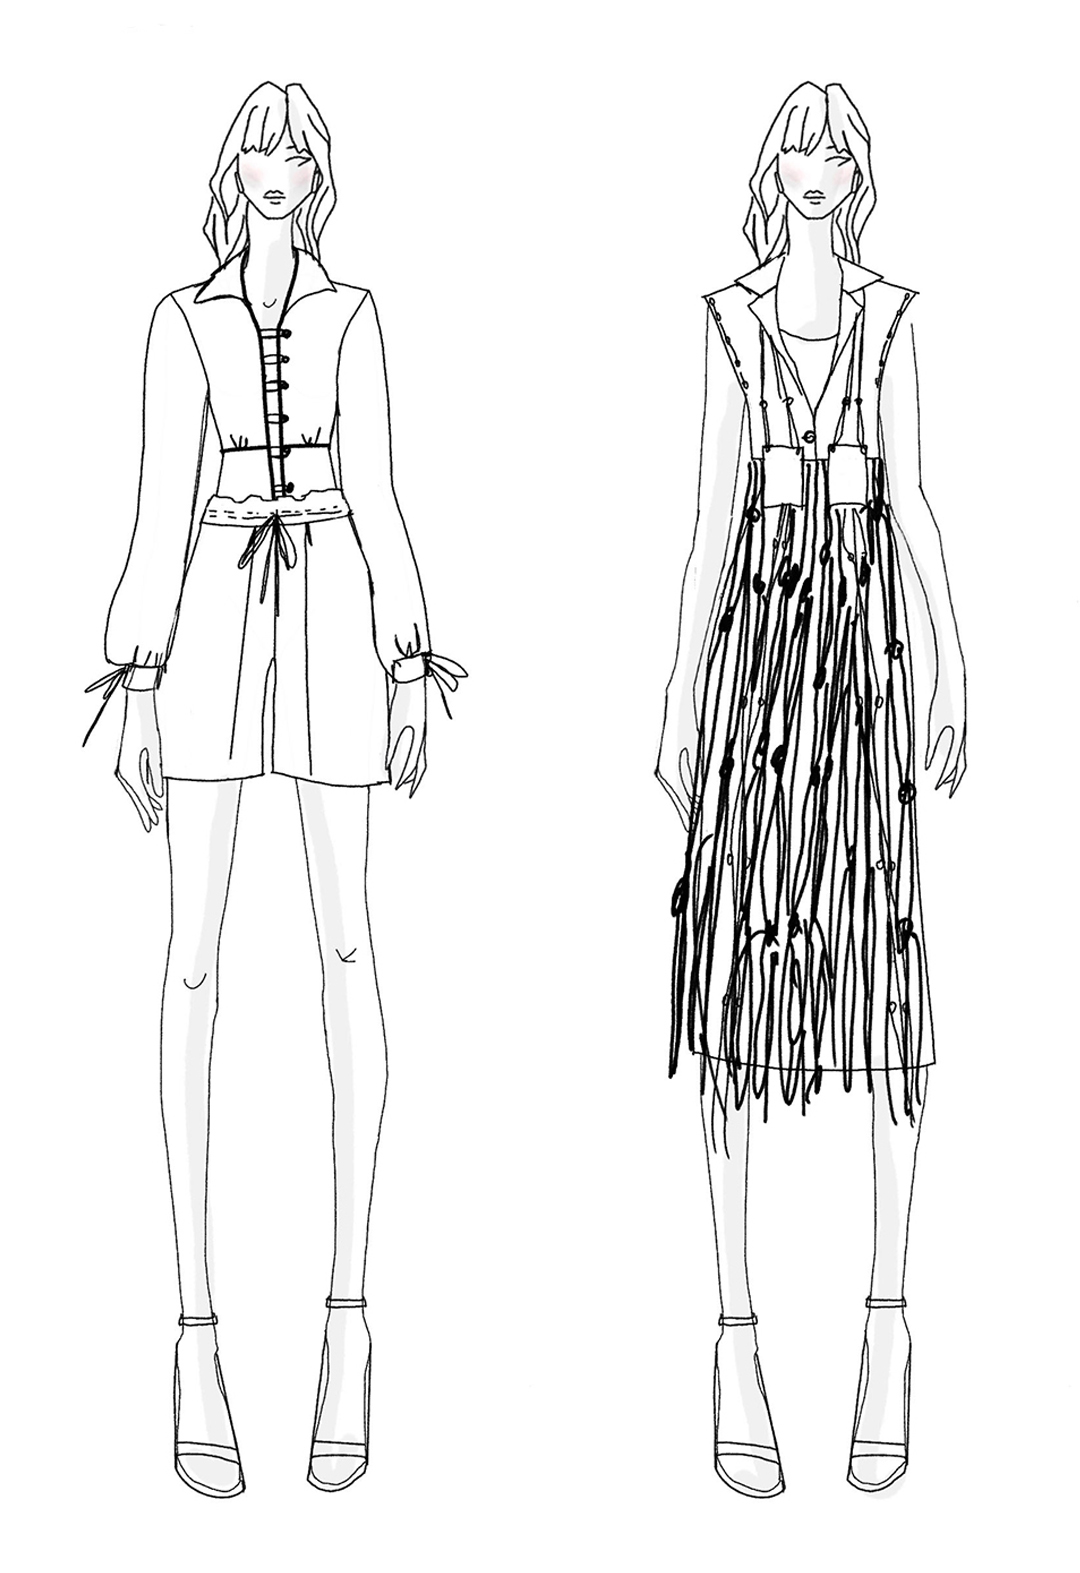 The image shows two sketches showing Look 1 and Look 2.